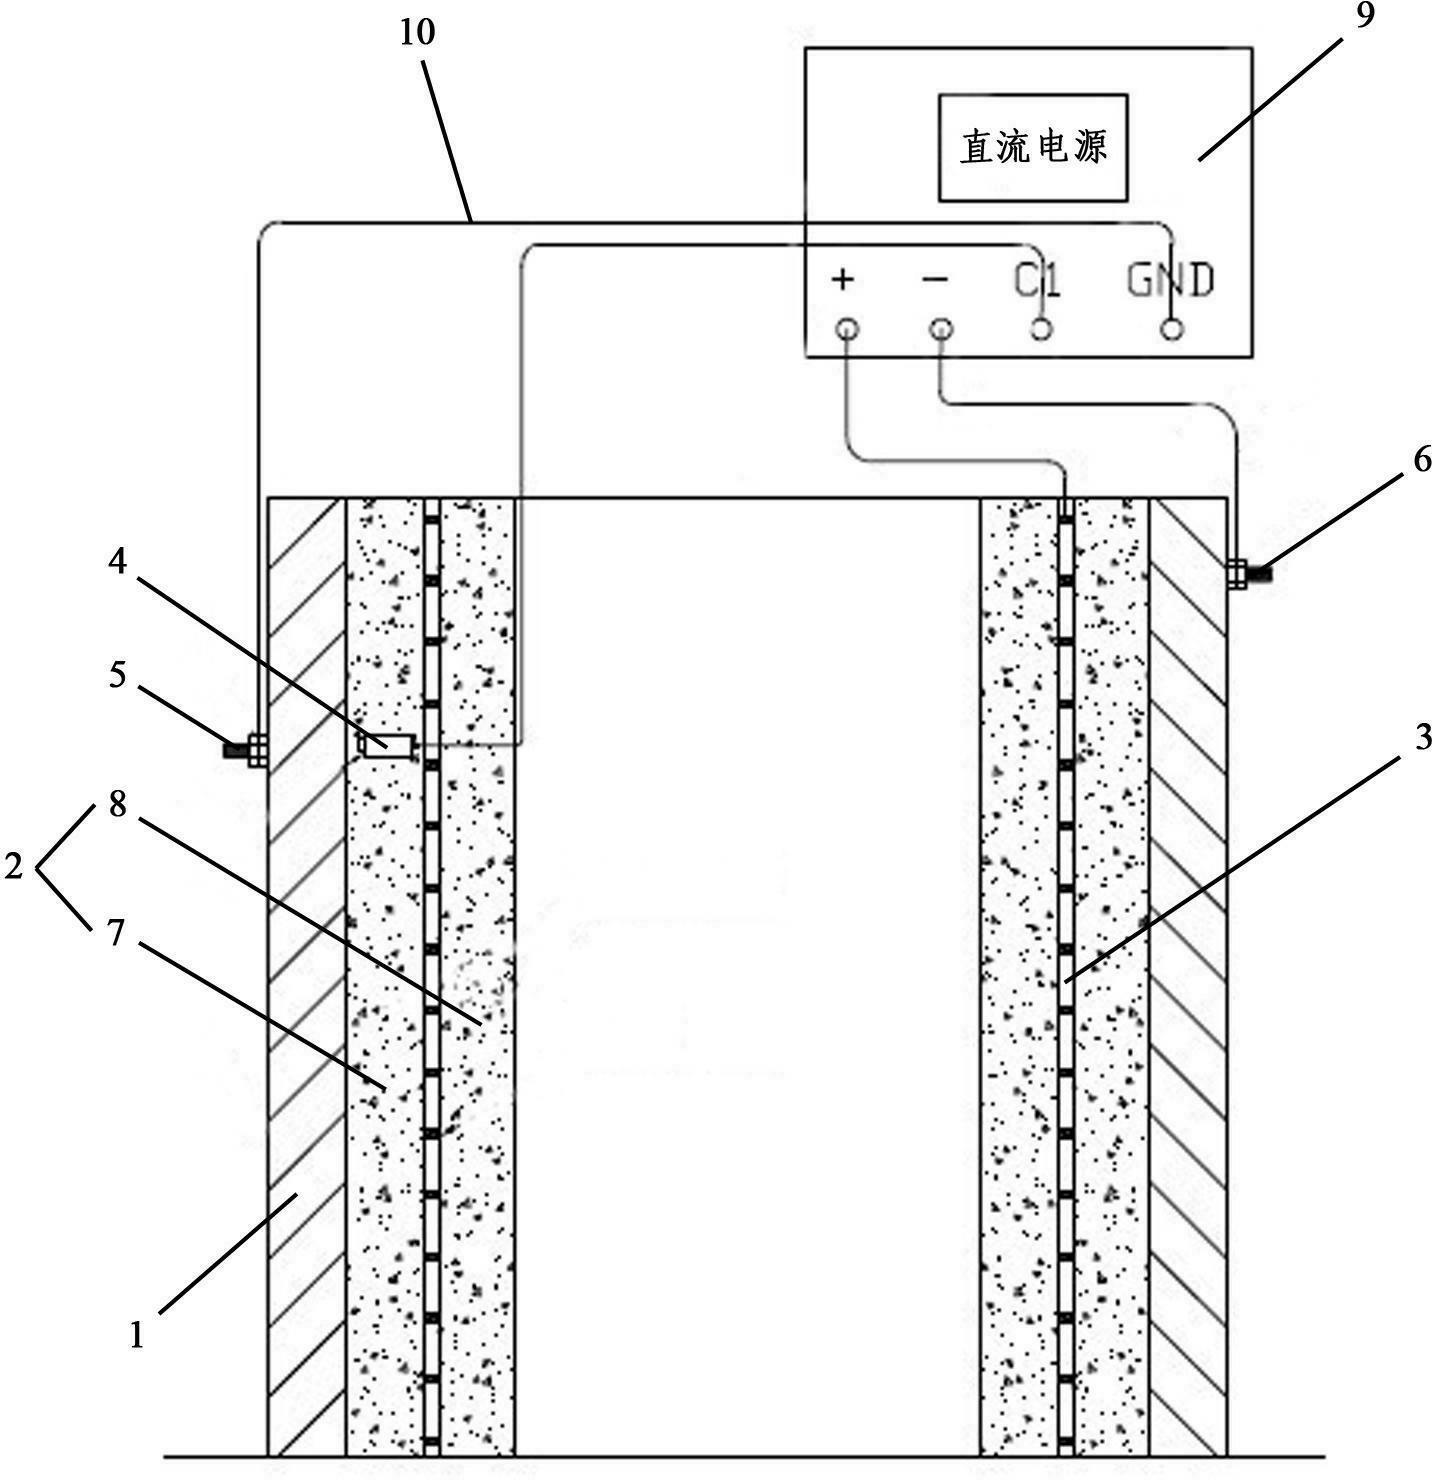 Cathodic protection system of wet desulfurized funnel